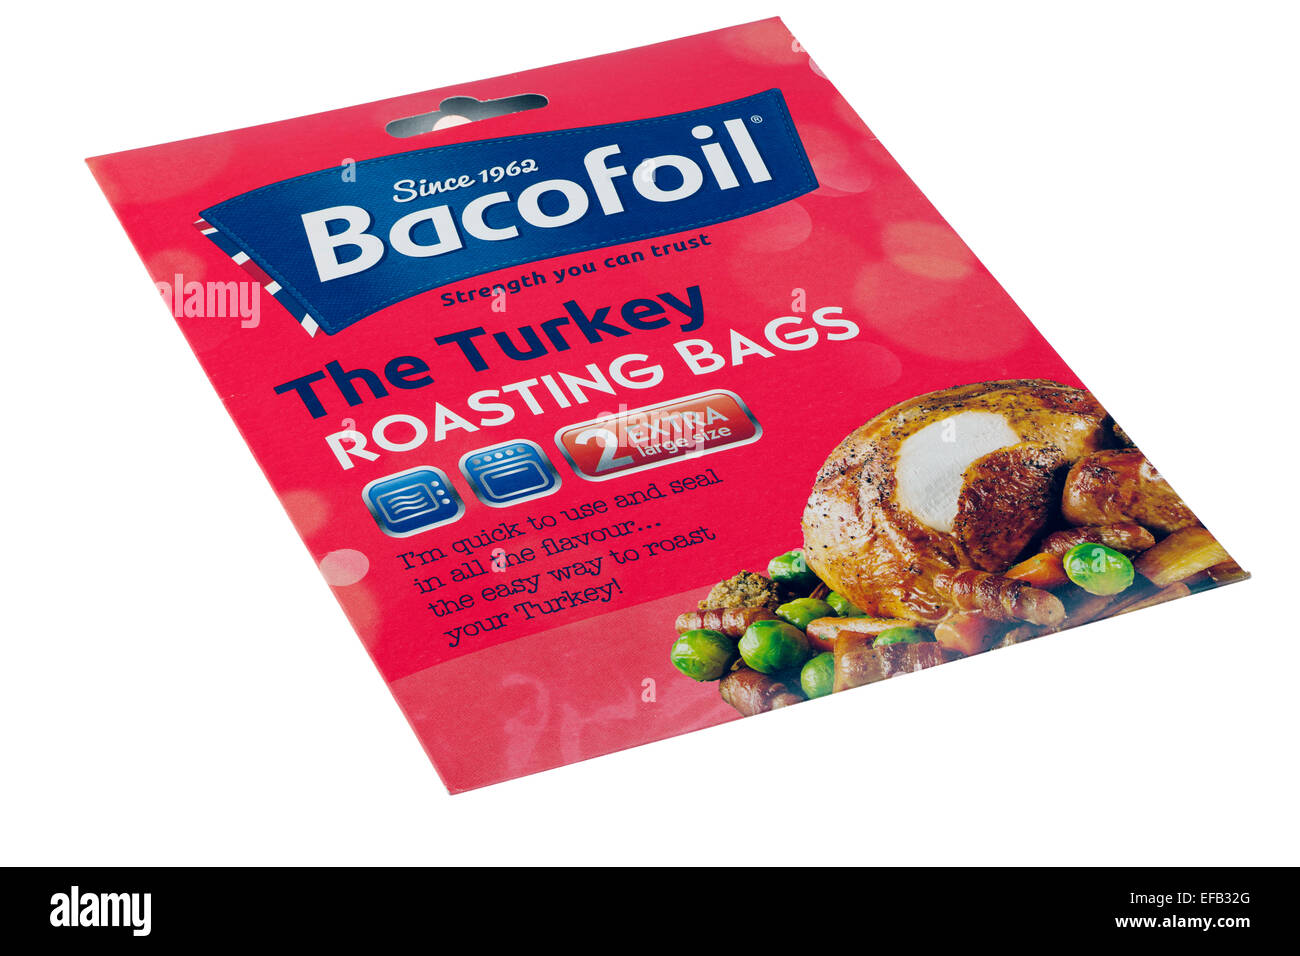 Pack of Bacofoil The Turkey roasting bags Stock Photo